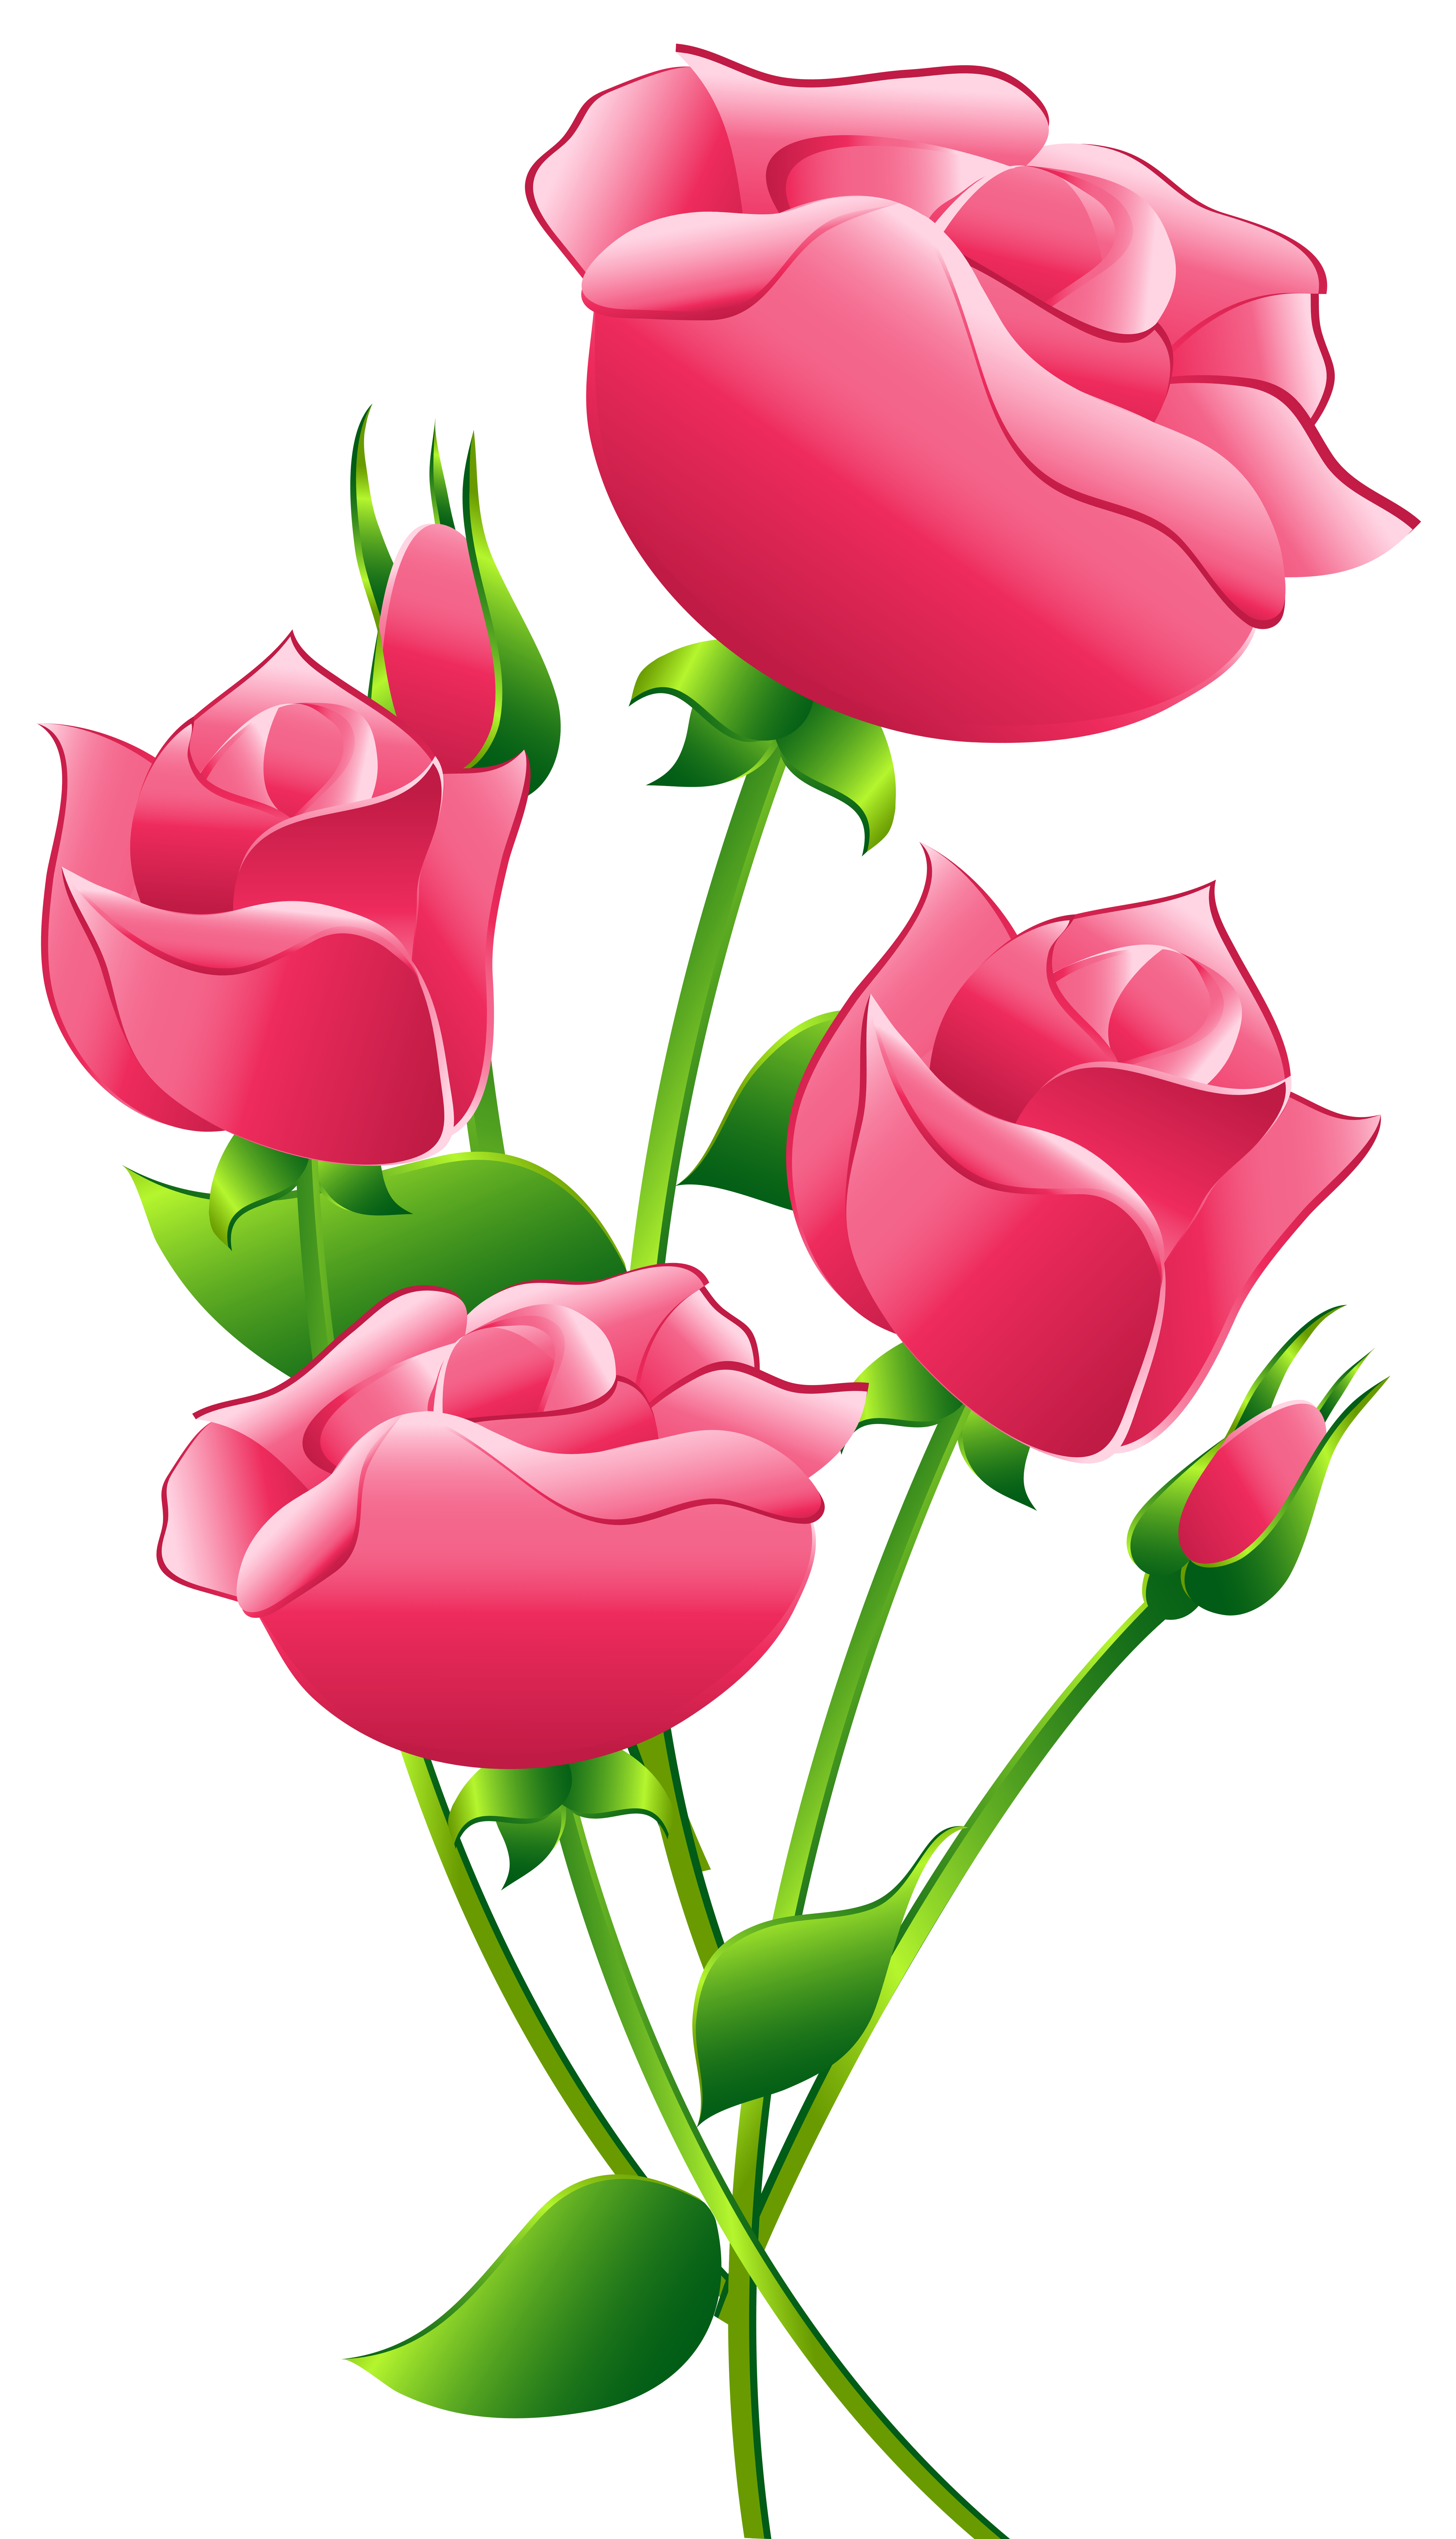 clipart of roses - photo #36